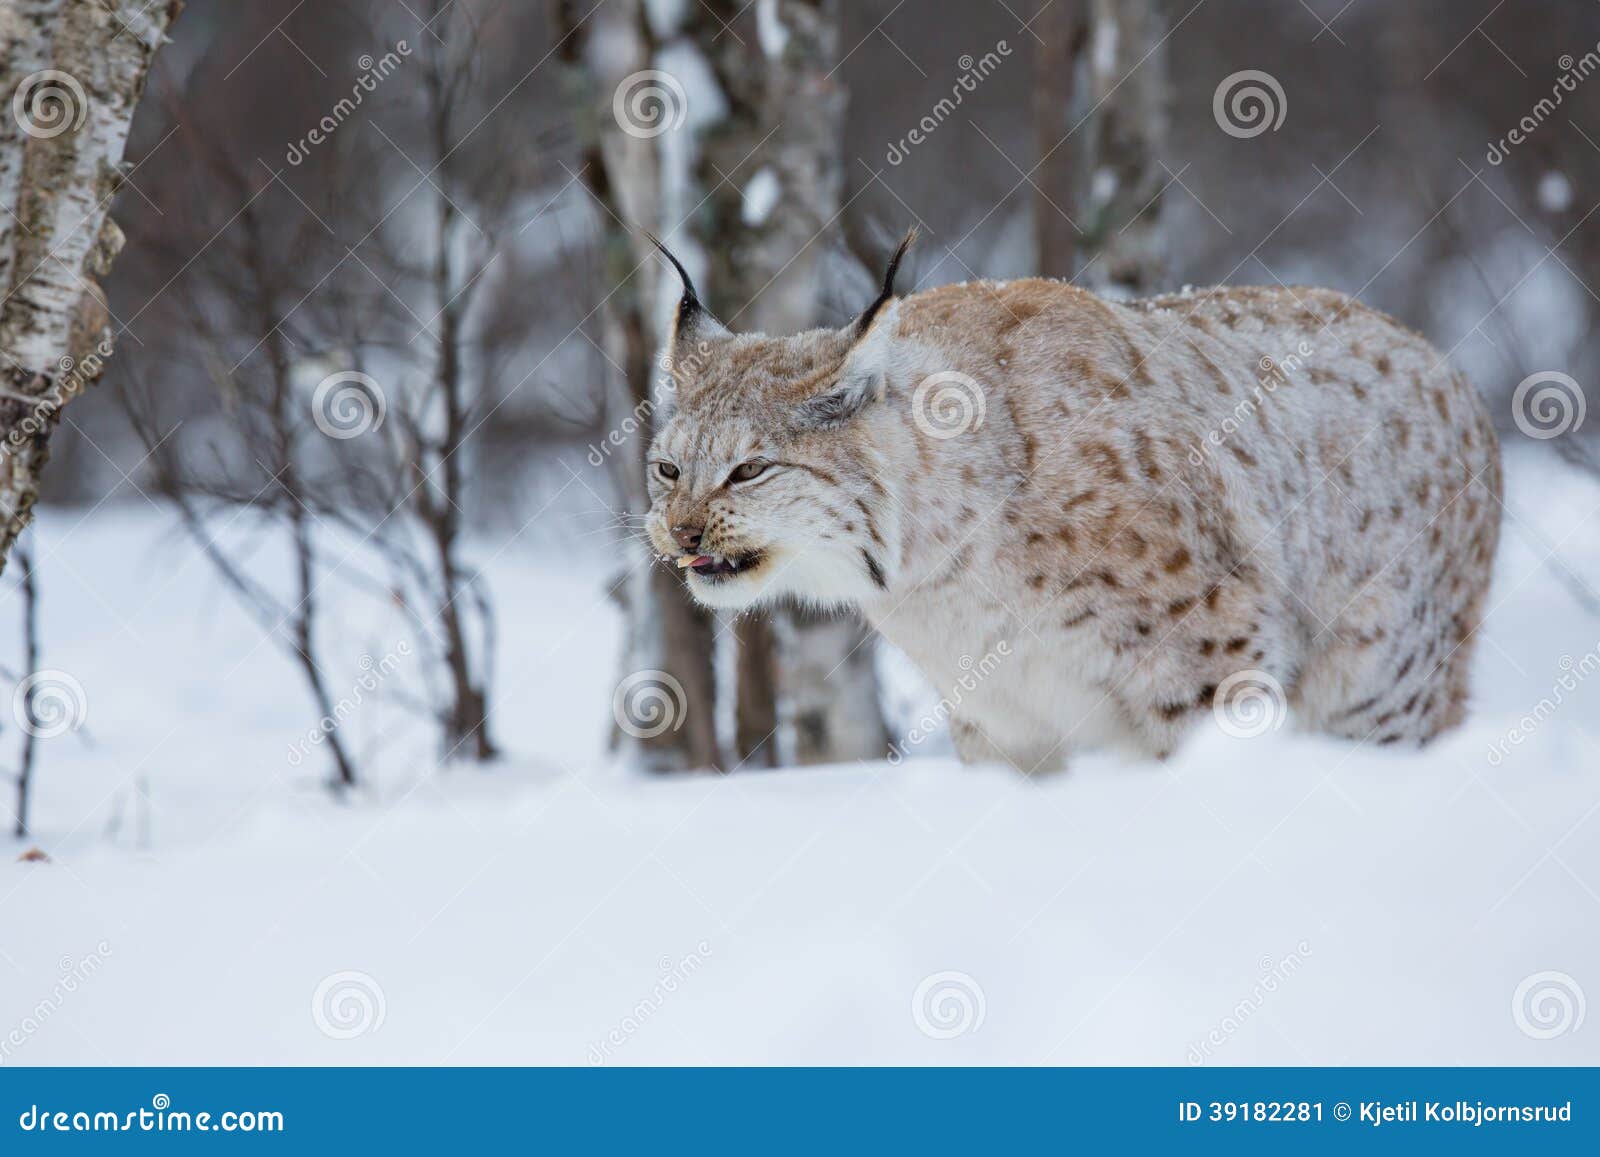 Lynx Eating Meat in the Forest Stock Image - Image of nature, pets ...